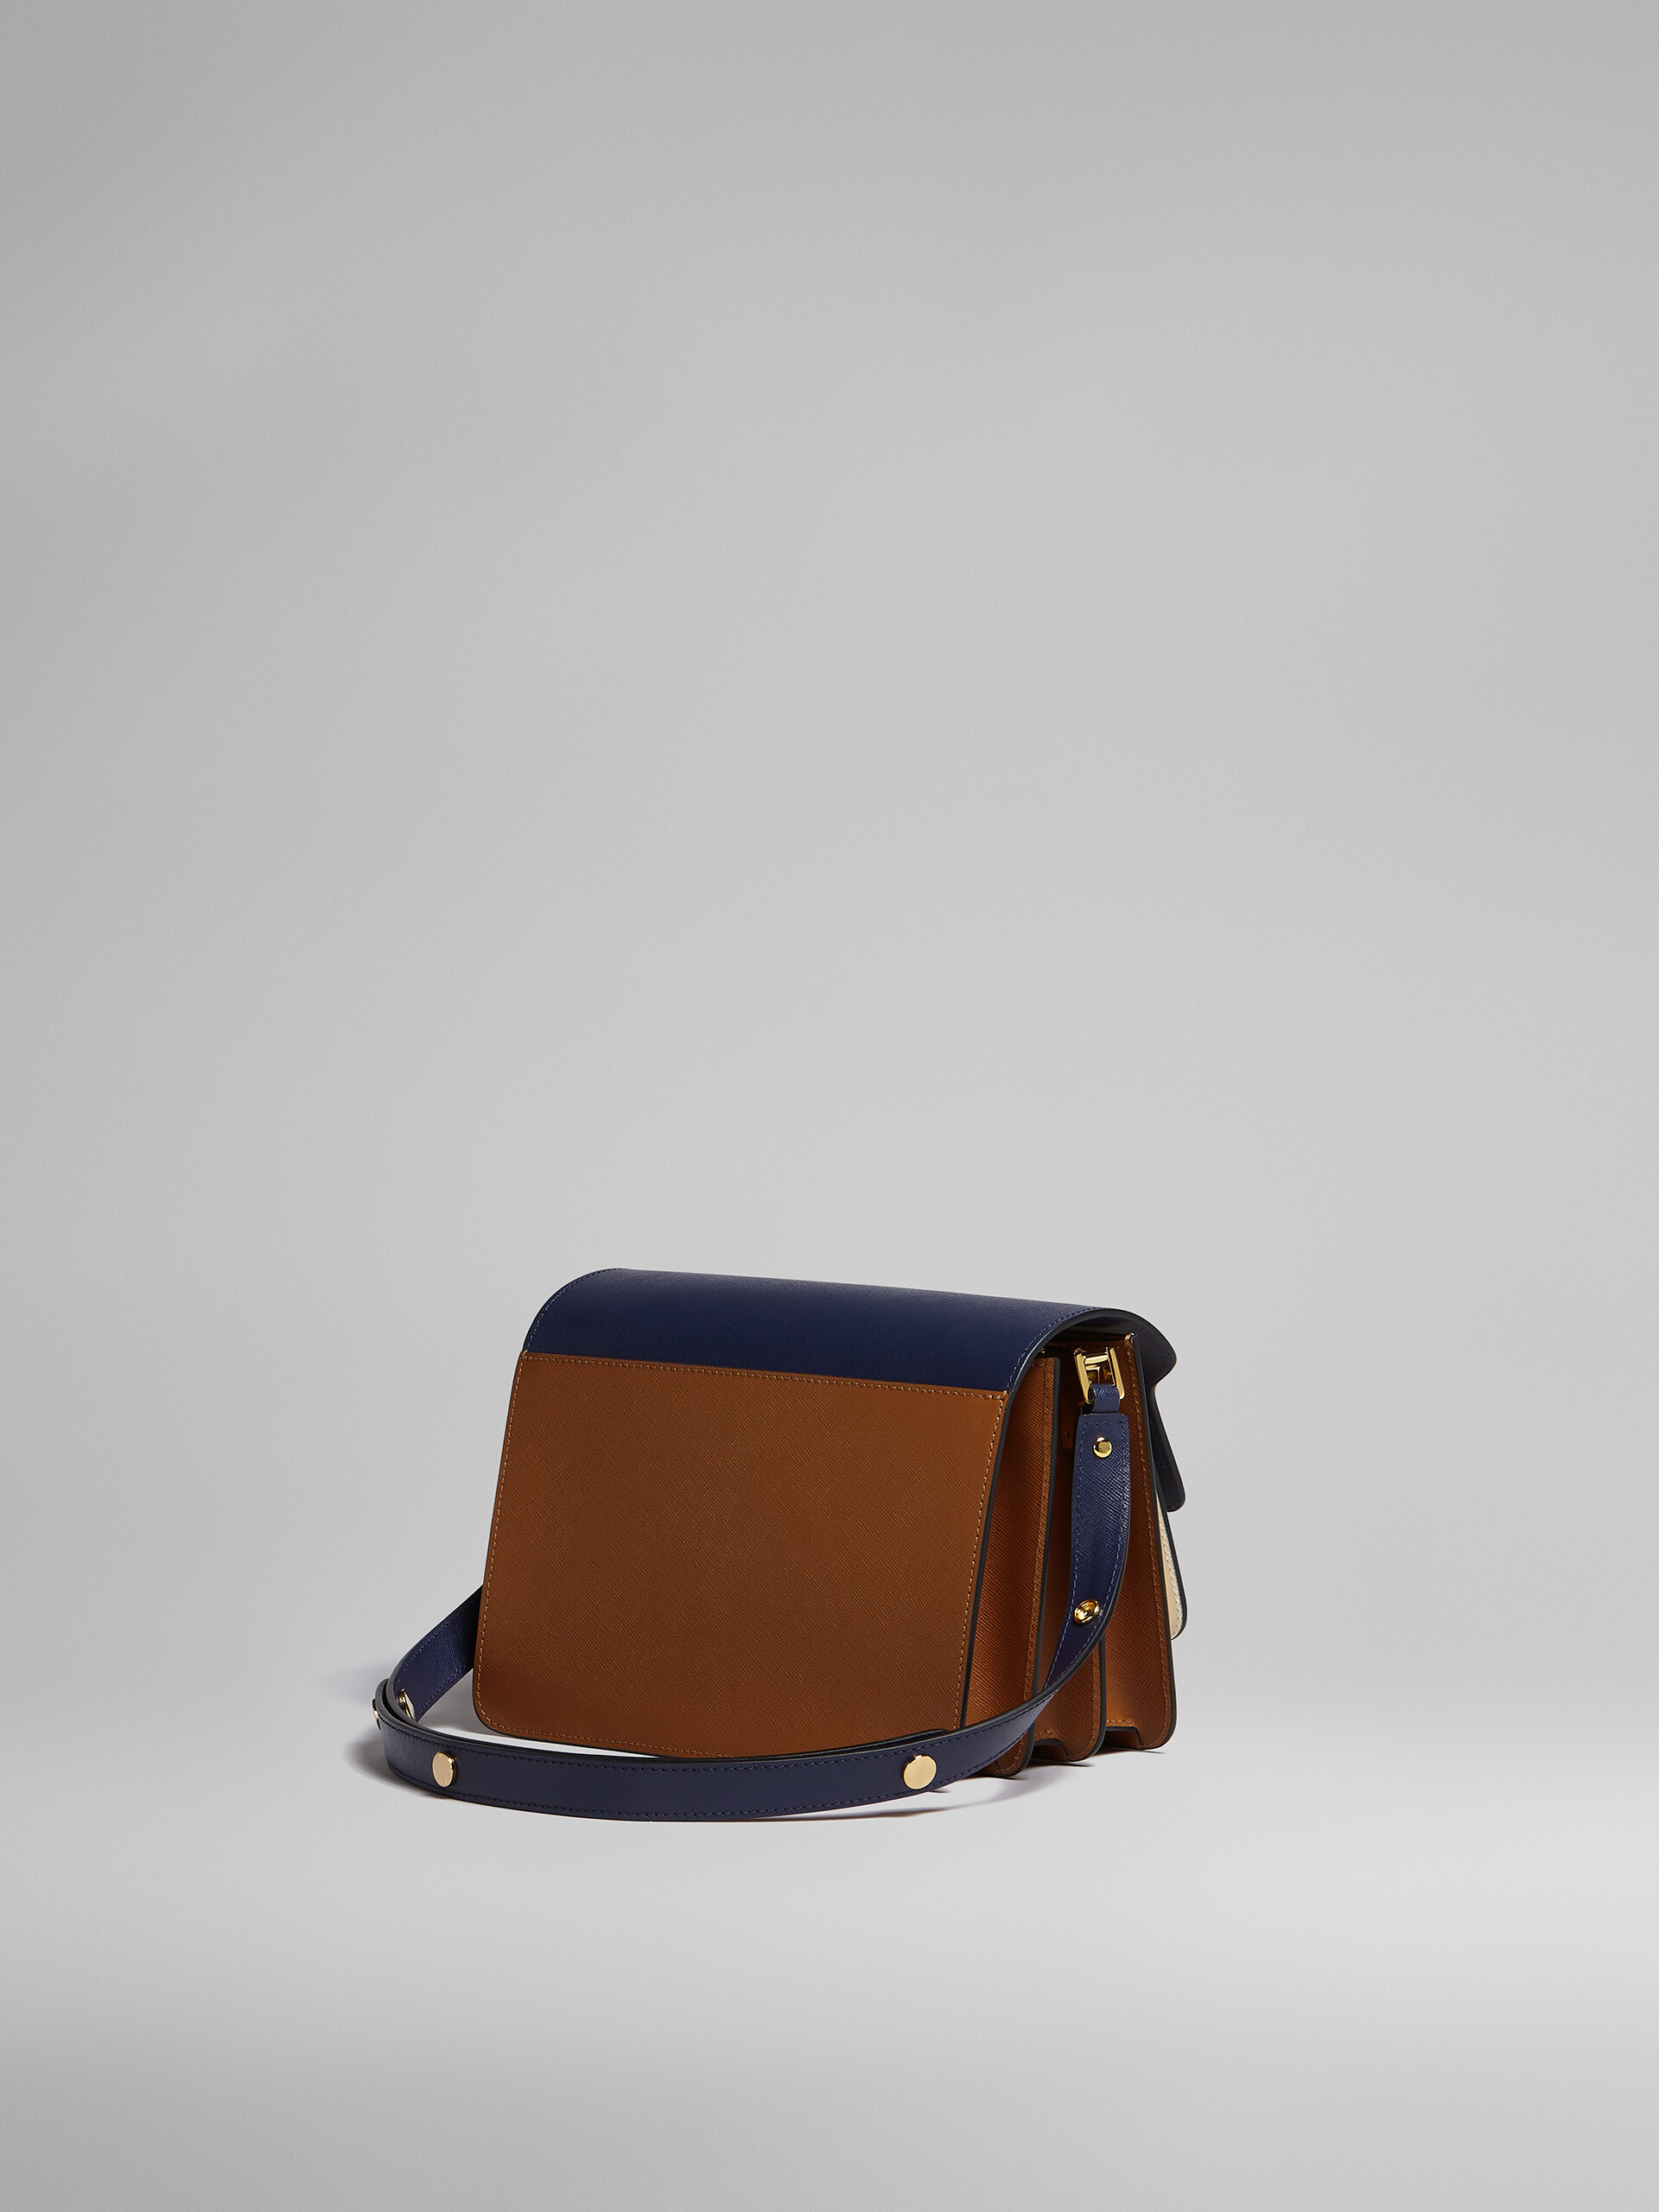 TRUNK medium bag in blue white and brown saffiano leather | Marni